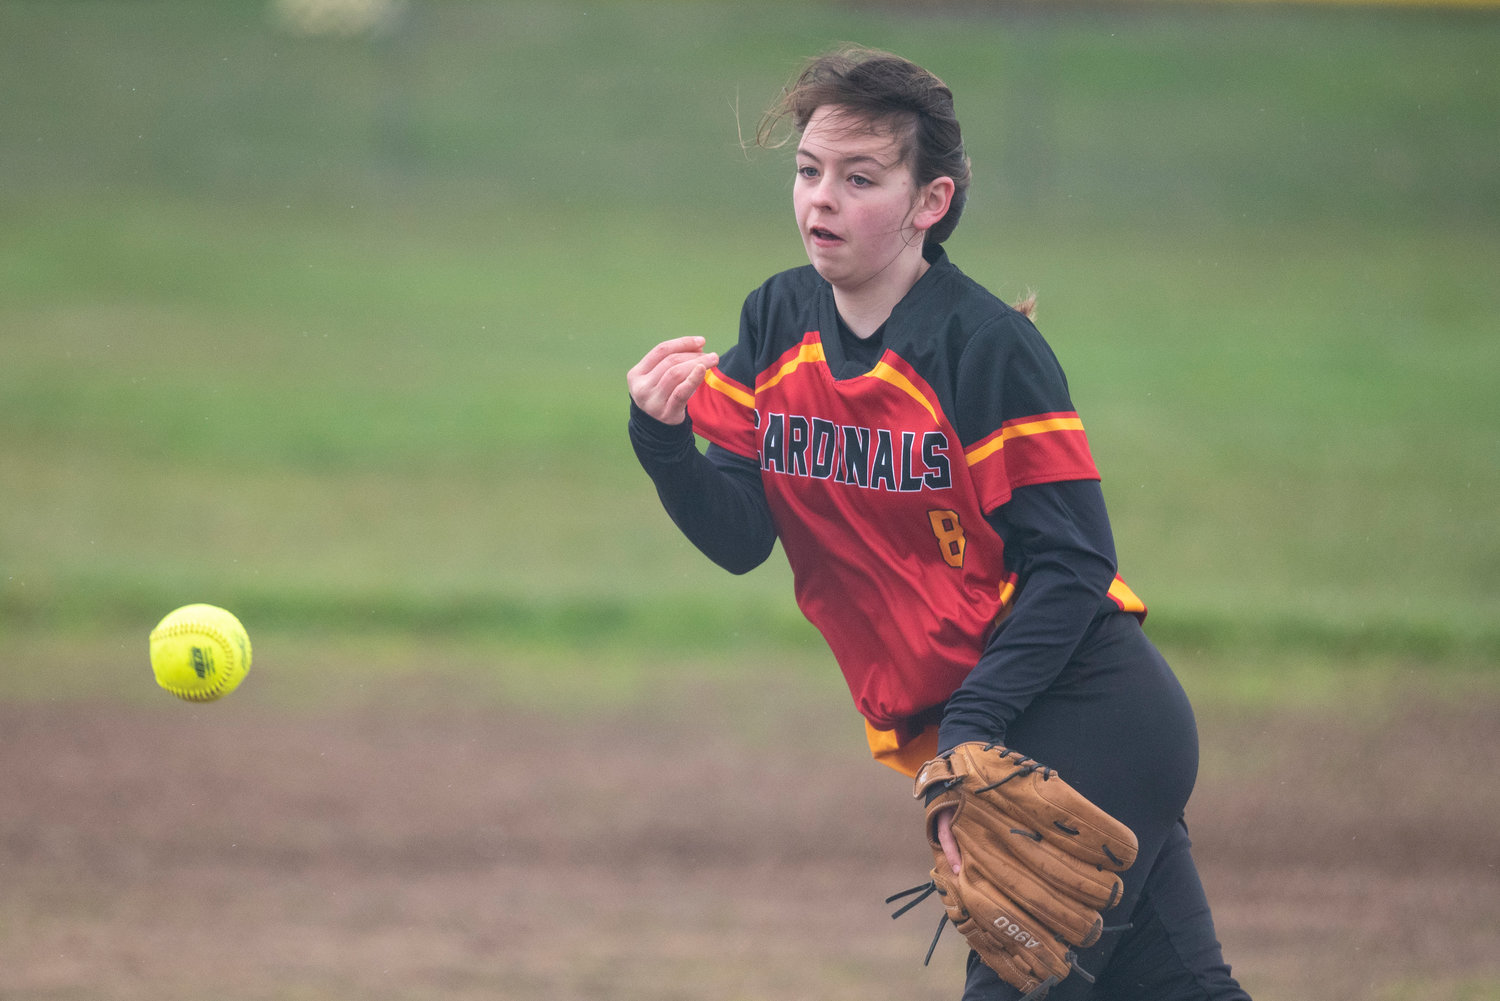 Winlock's Cali Geehan tosses a pitch to an Adna batter during a home game on April 20.